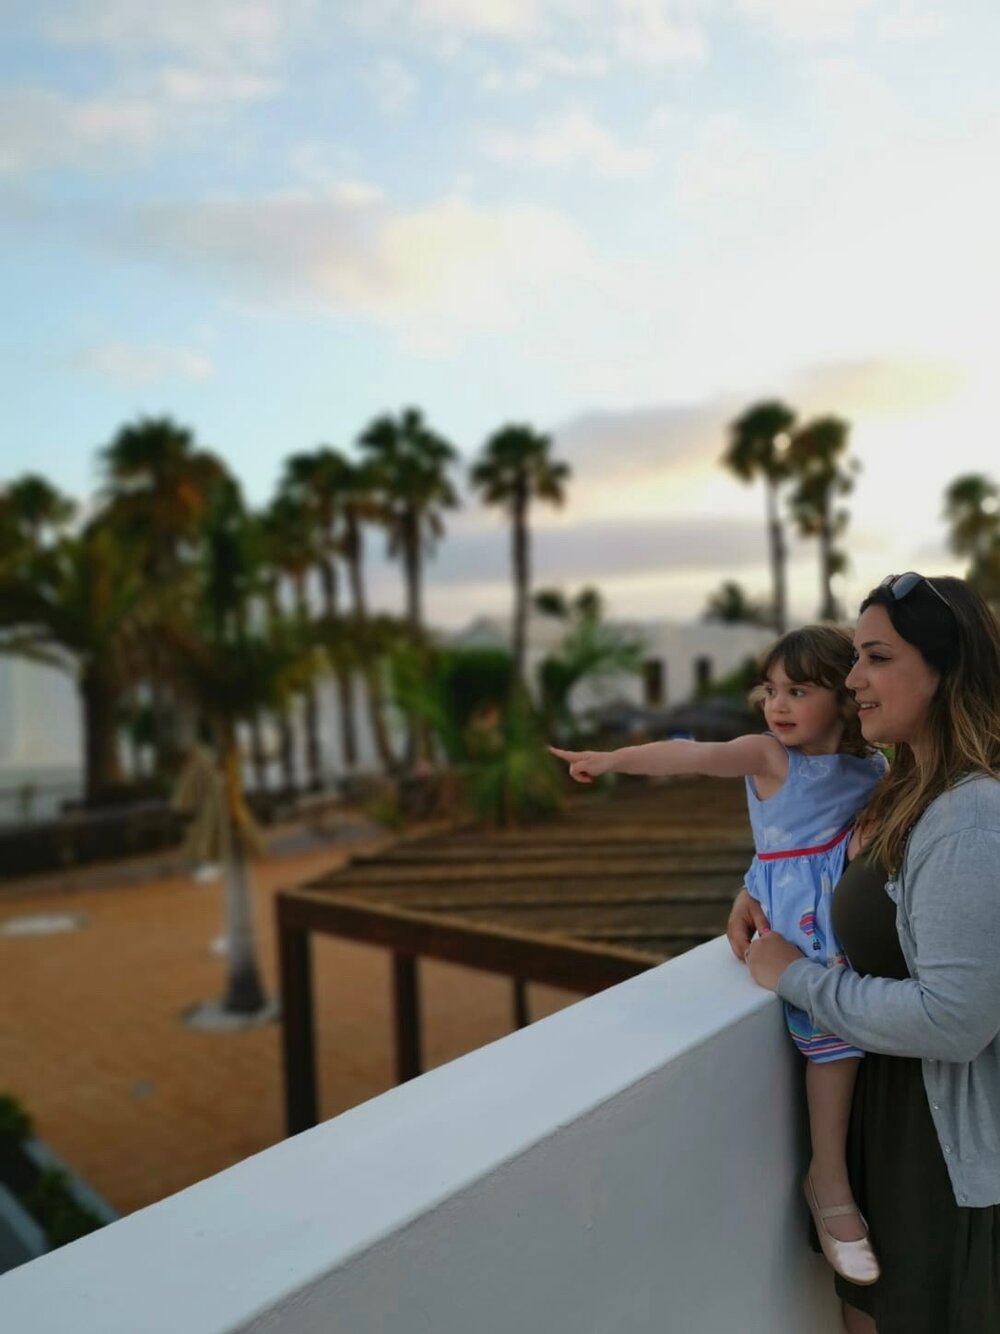 Punteha holding Millie in her arms on holiday in Lanzarote and looking out over the sunset. Photo: Lacuna Voices